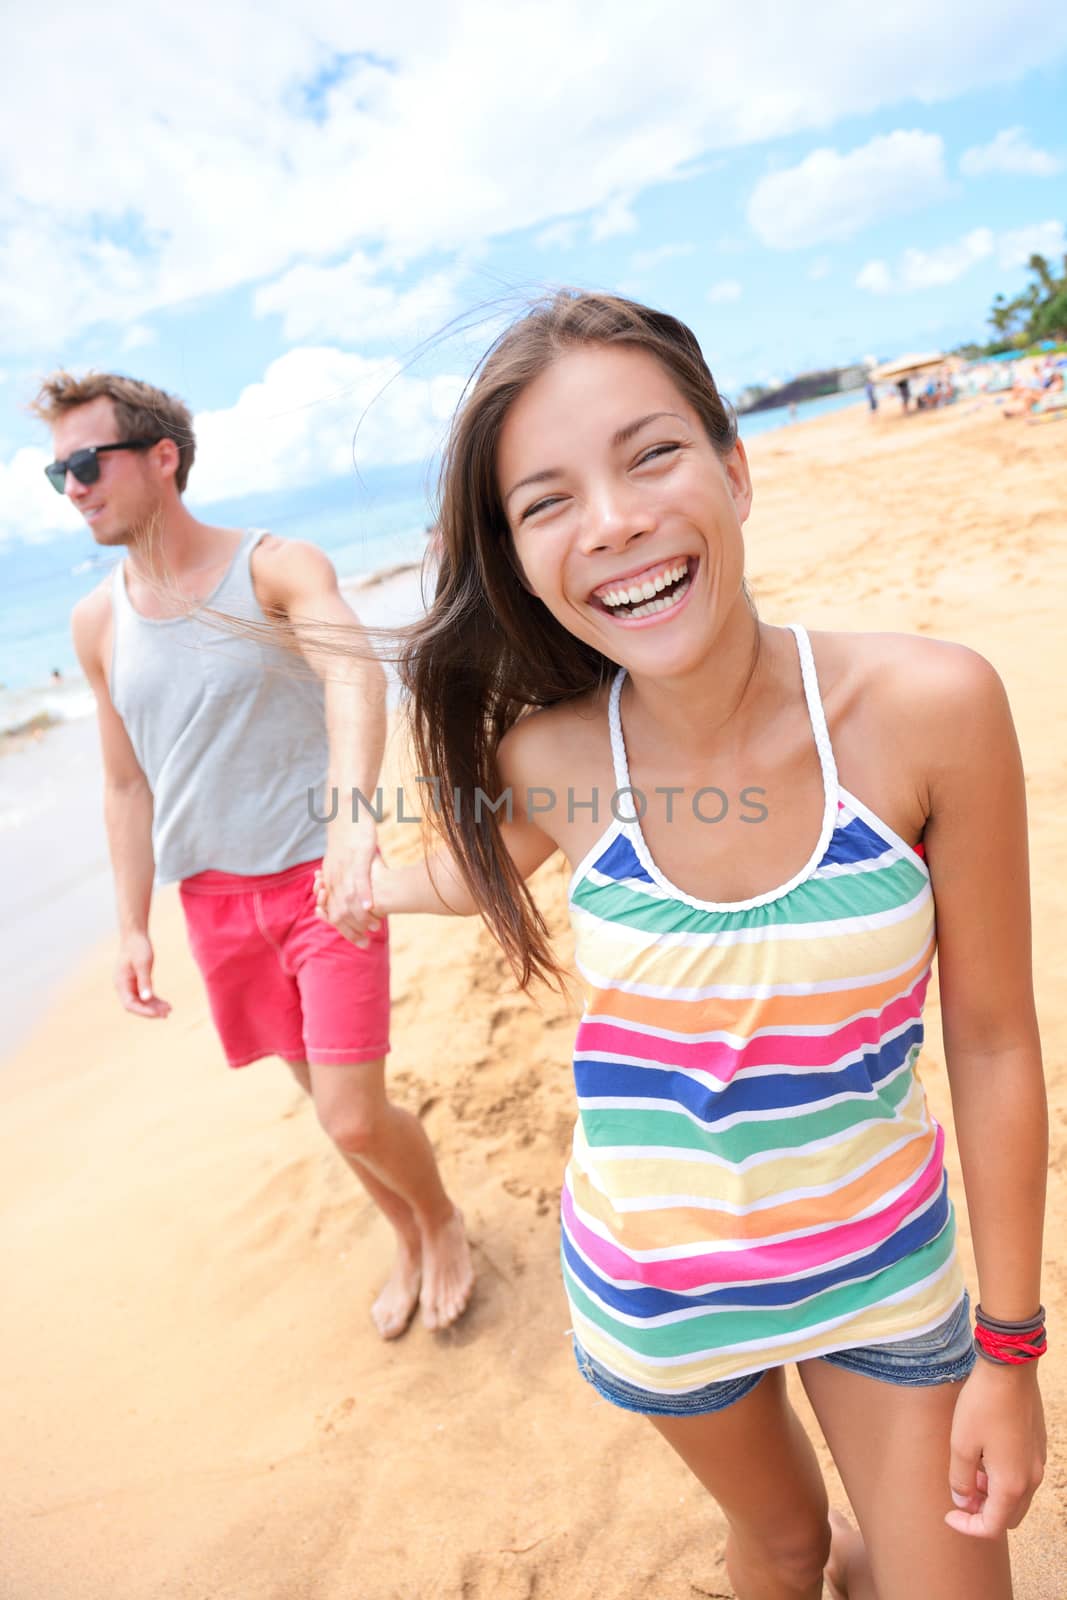 Beach people. Young interracial happy playful couple holding hands walking on beach having fun on travel vacation - woman smiling laughing man in background . Asian woman, Caucasian man on Big Island, Hawaii, USA.